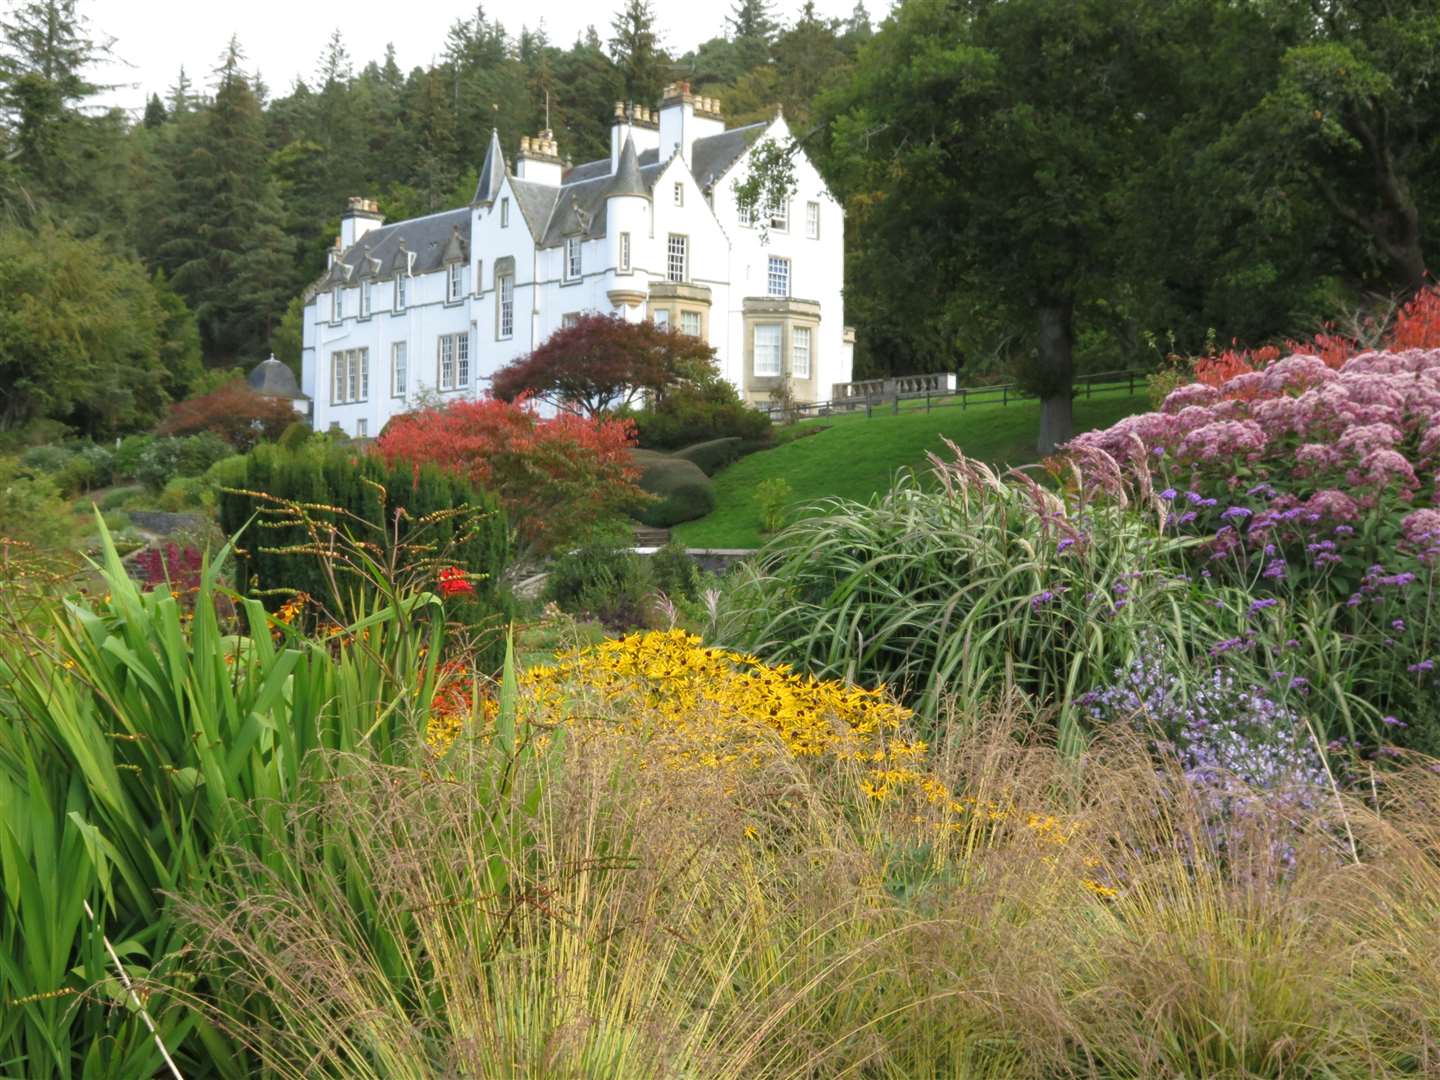 Logie House Garden on the outskirts of Forres.